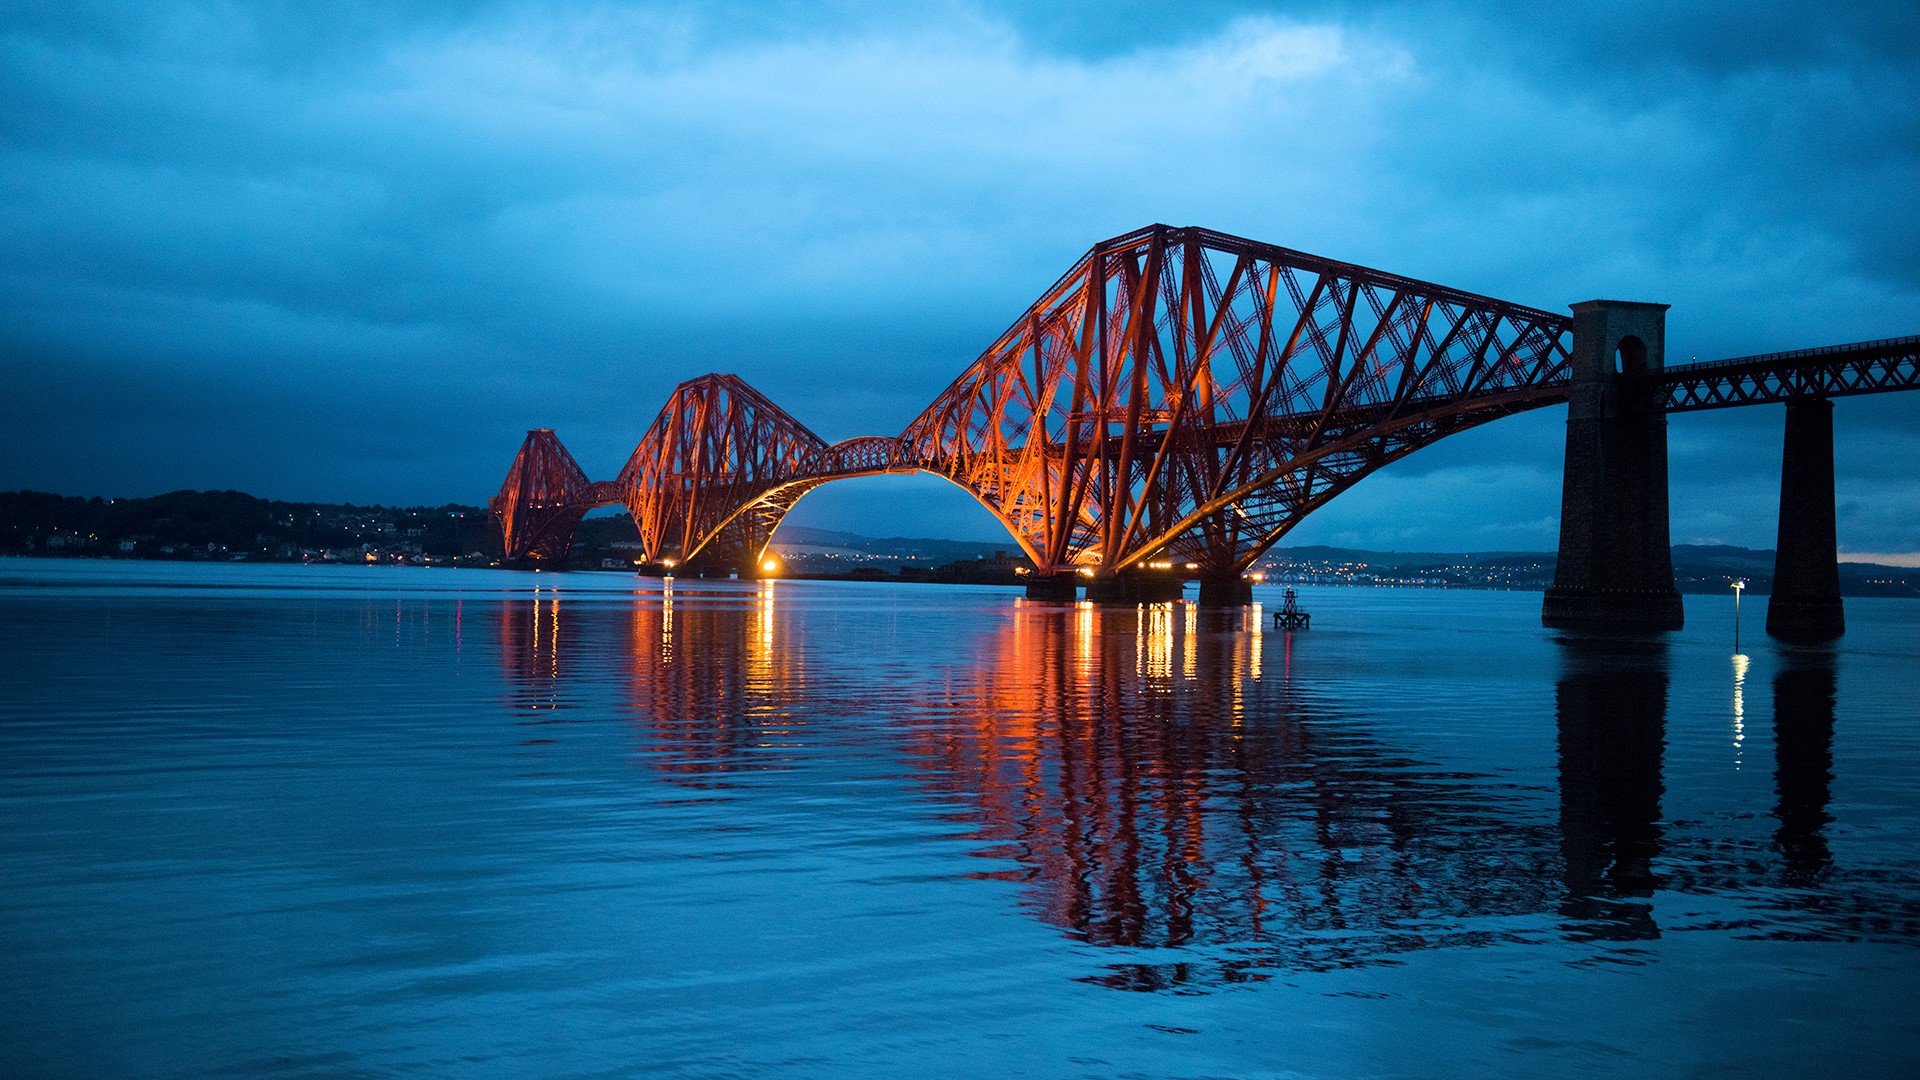 Night view at Forth Bridge across the Firth of Forth, South Queensferry, Scotland, UK. Windows 10 Spotlight Image